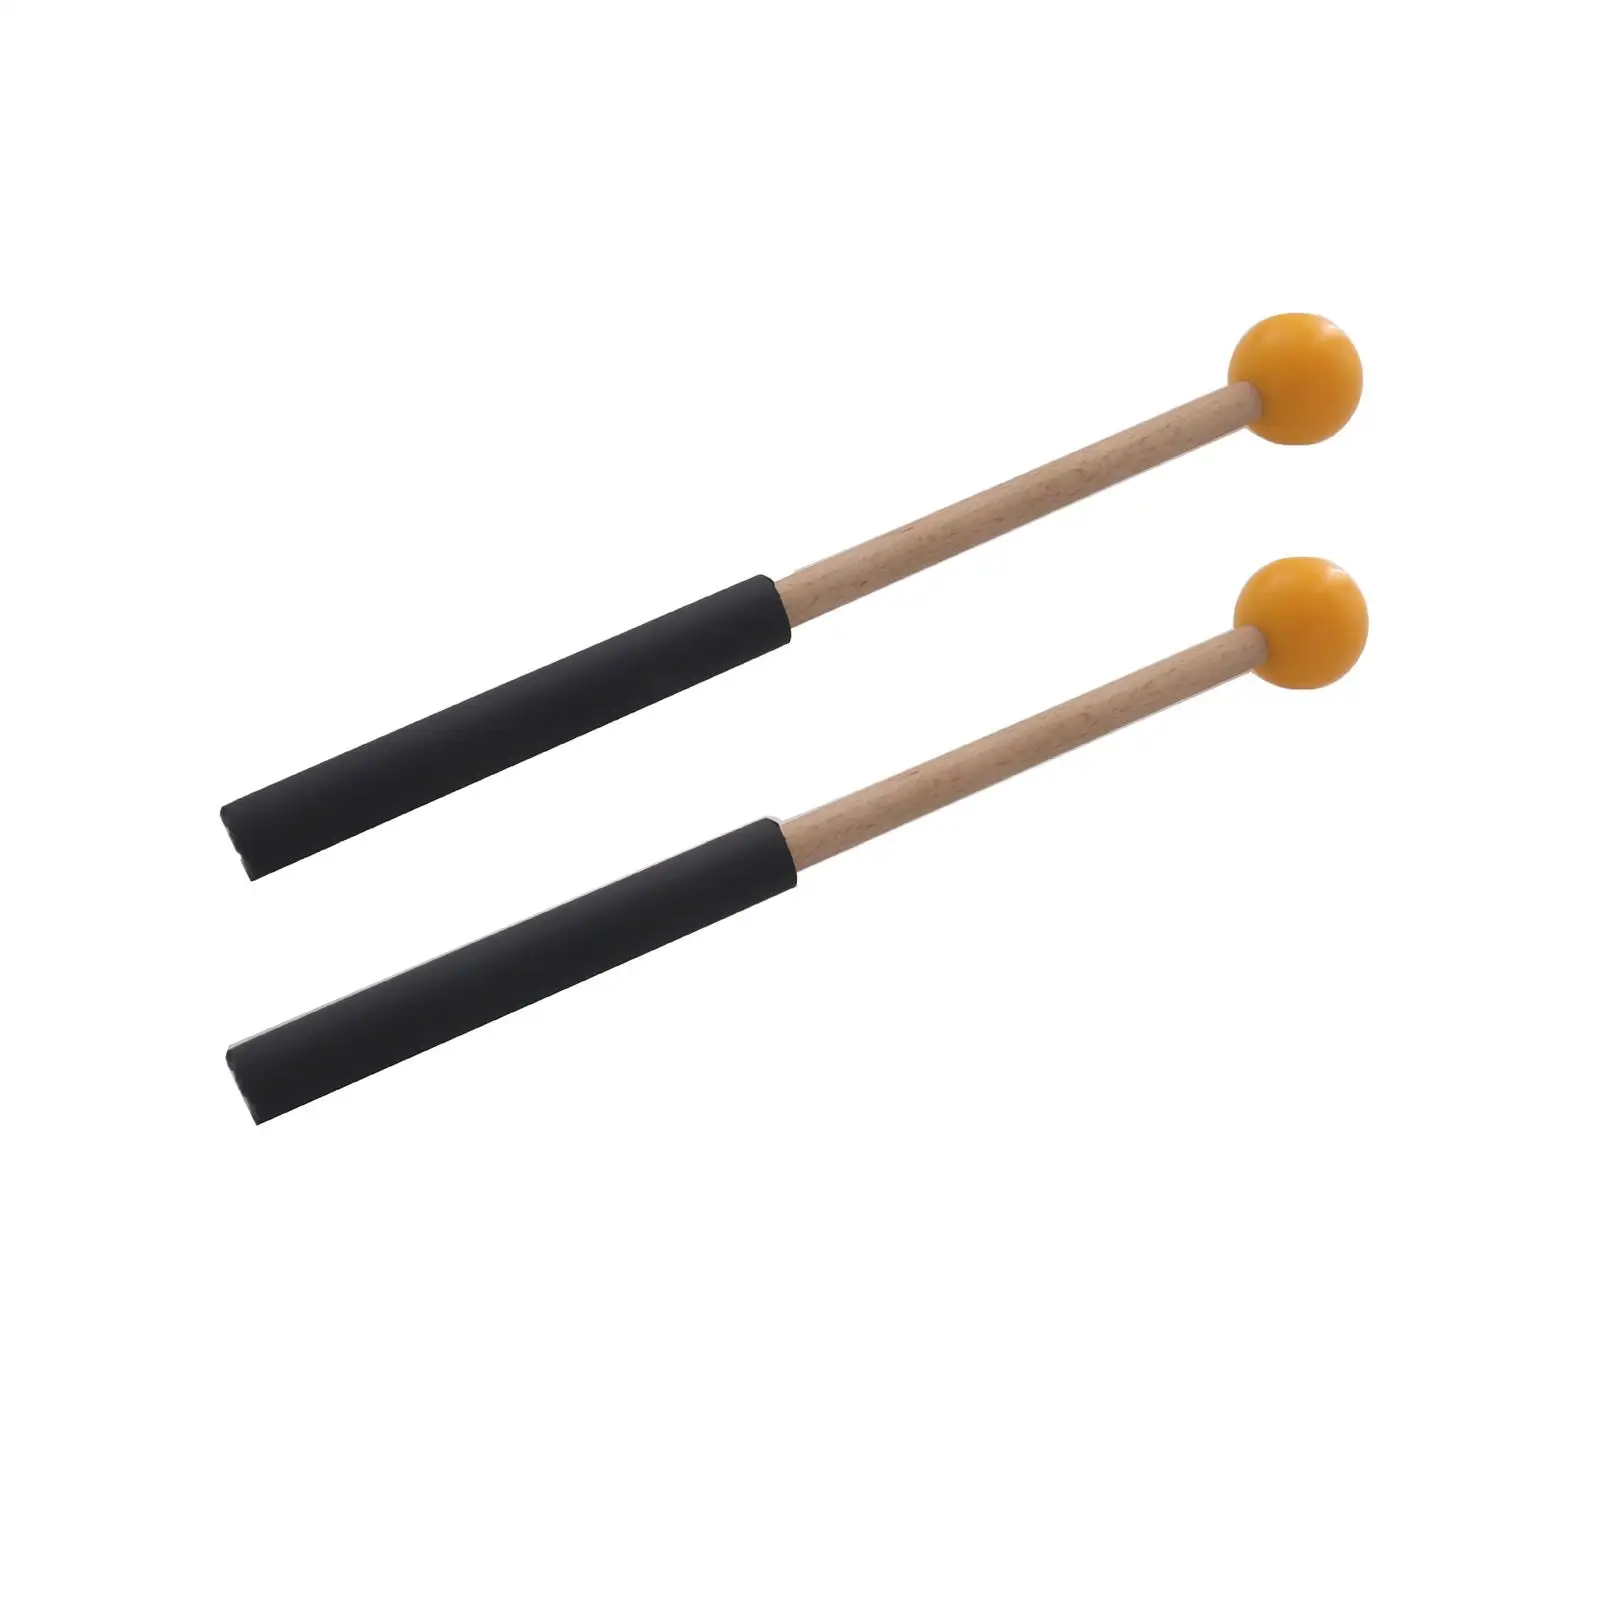 2 Pieces 8.6inch Rubber Mallet Percussion Musical Drumstick Percussion Drumsticks for Music Education Marimba Yoga Exercise